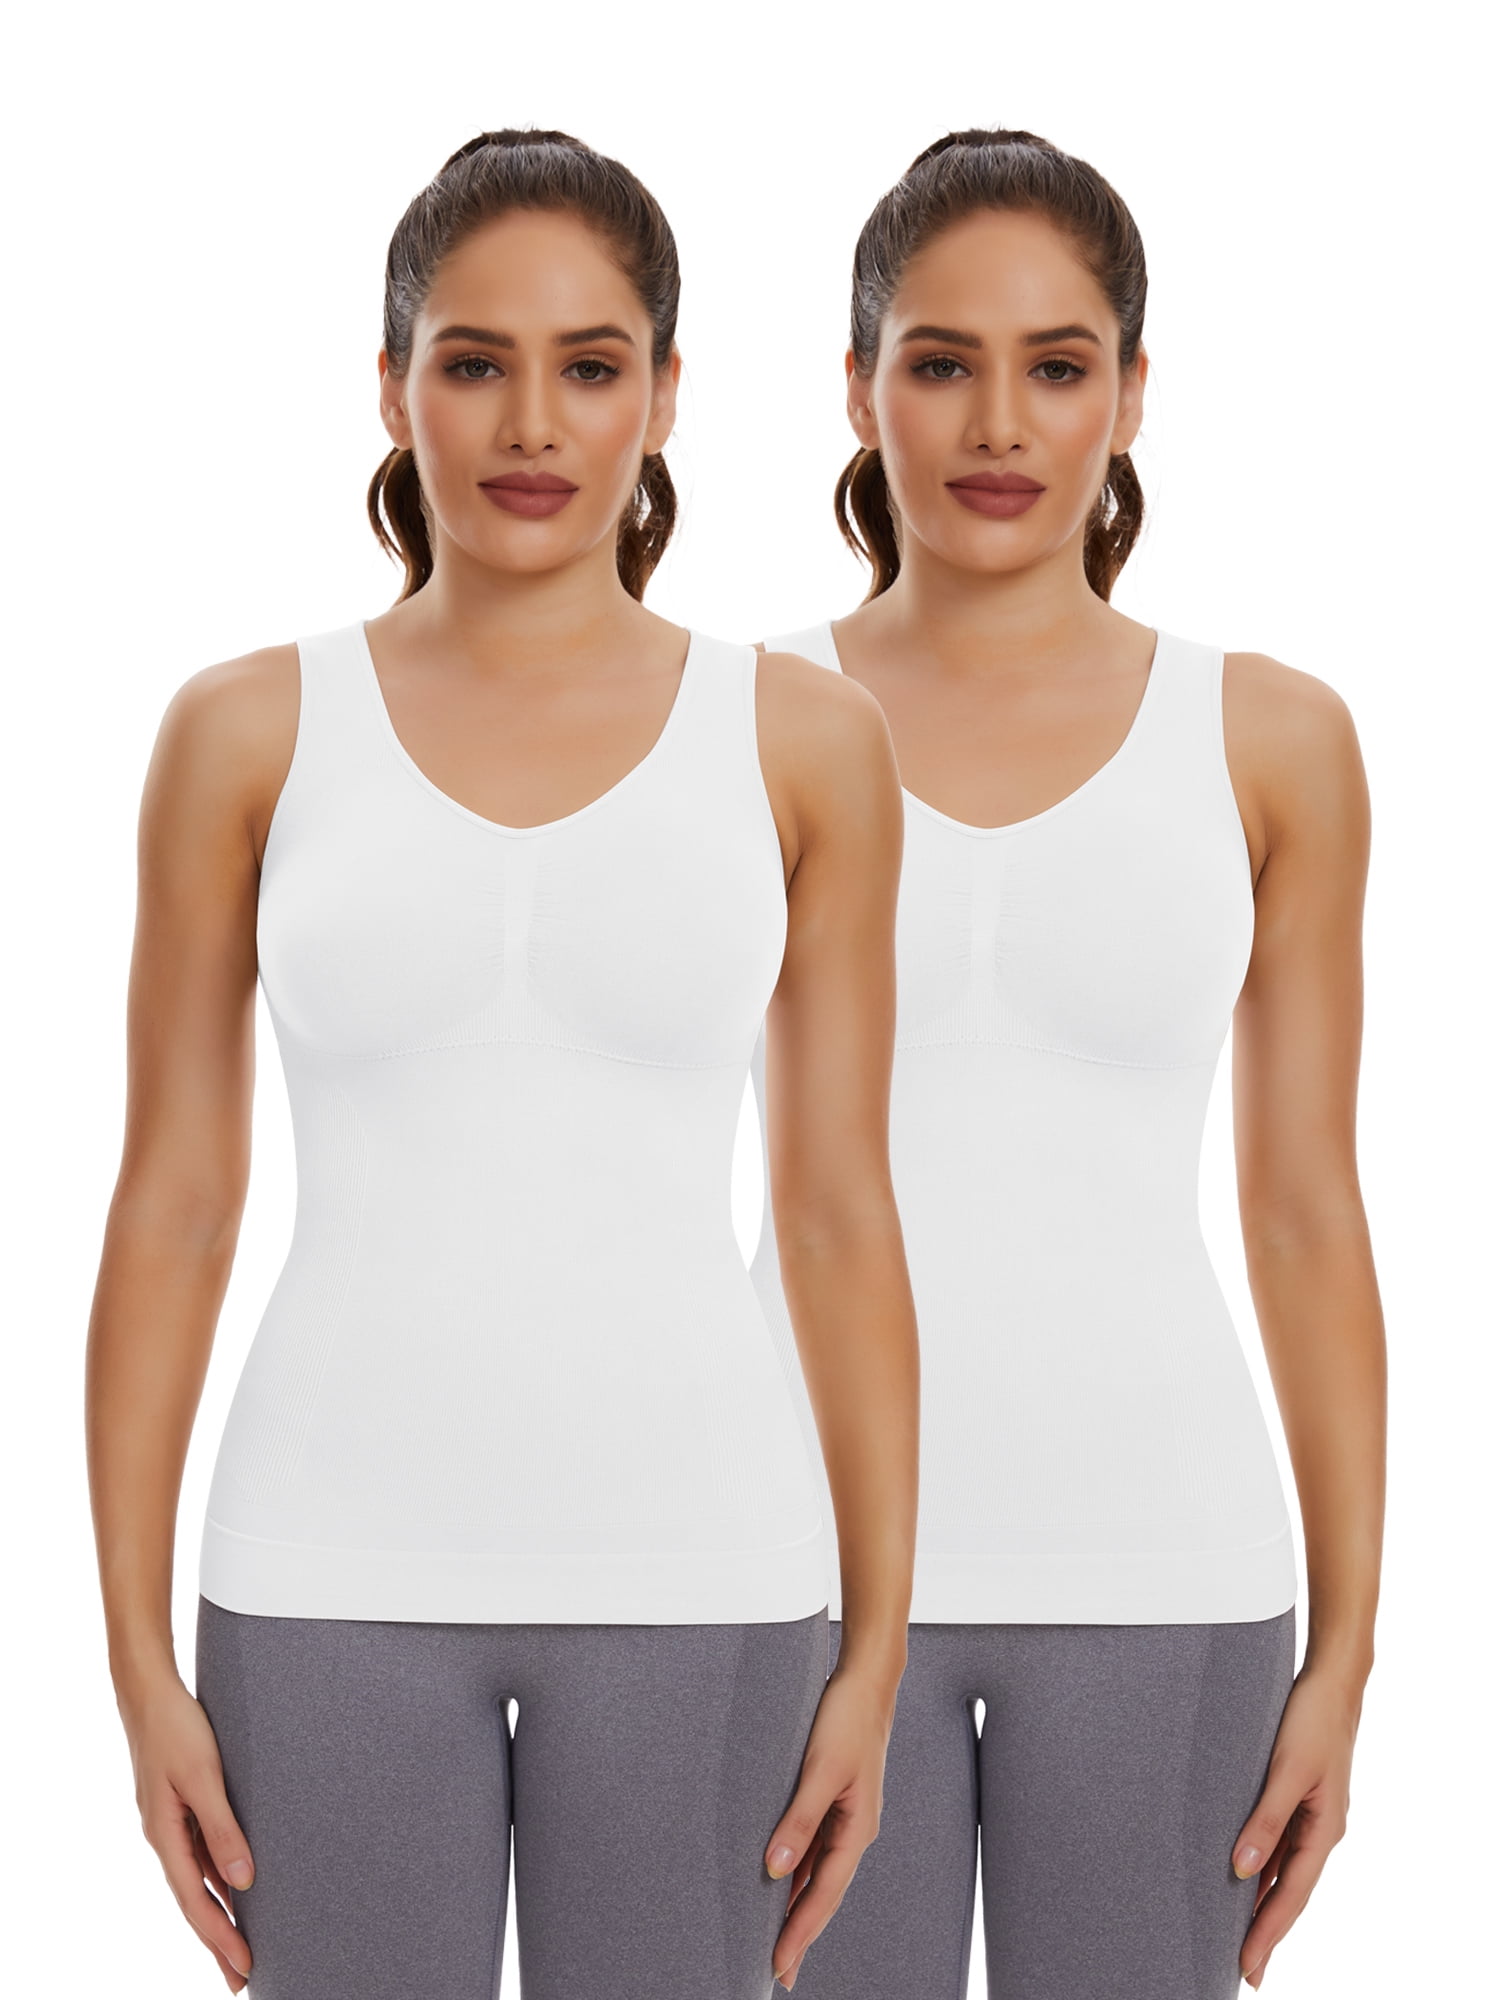 COMFREE Camisoles for Women with Built in Bra Slimming Cami Shaper Tummy  Control Tank Top Shapewear Body Shaper